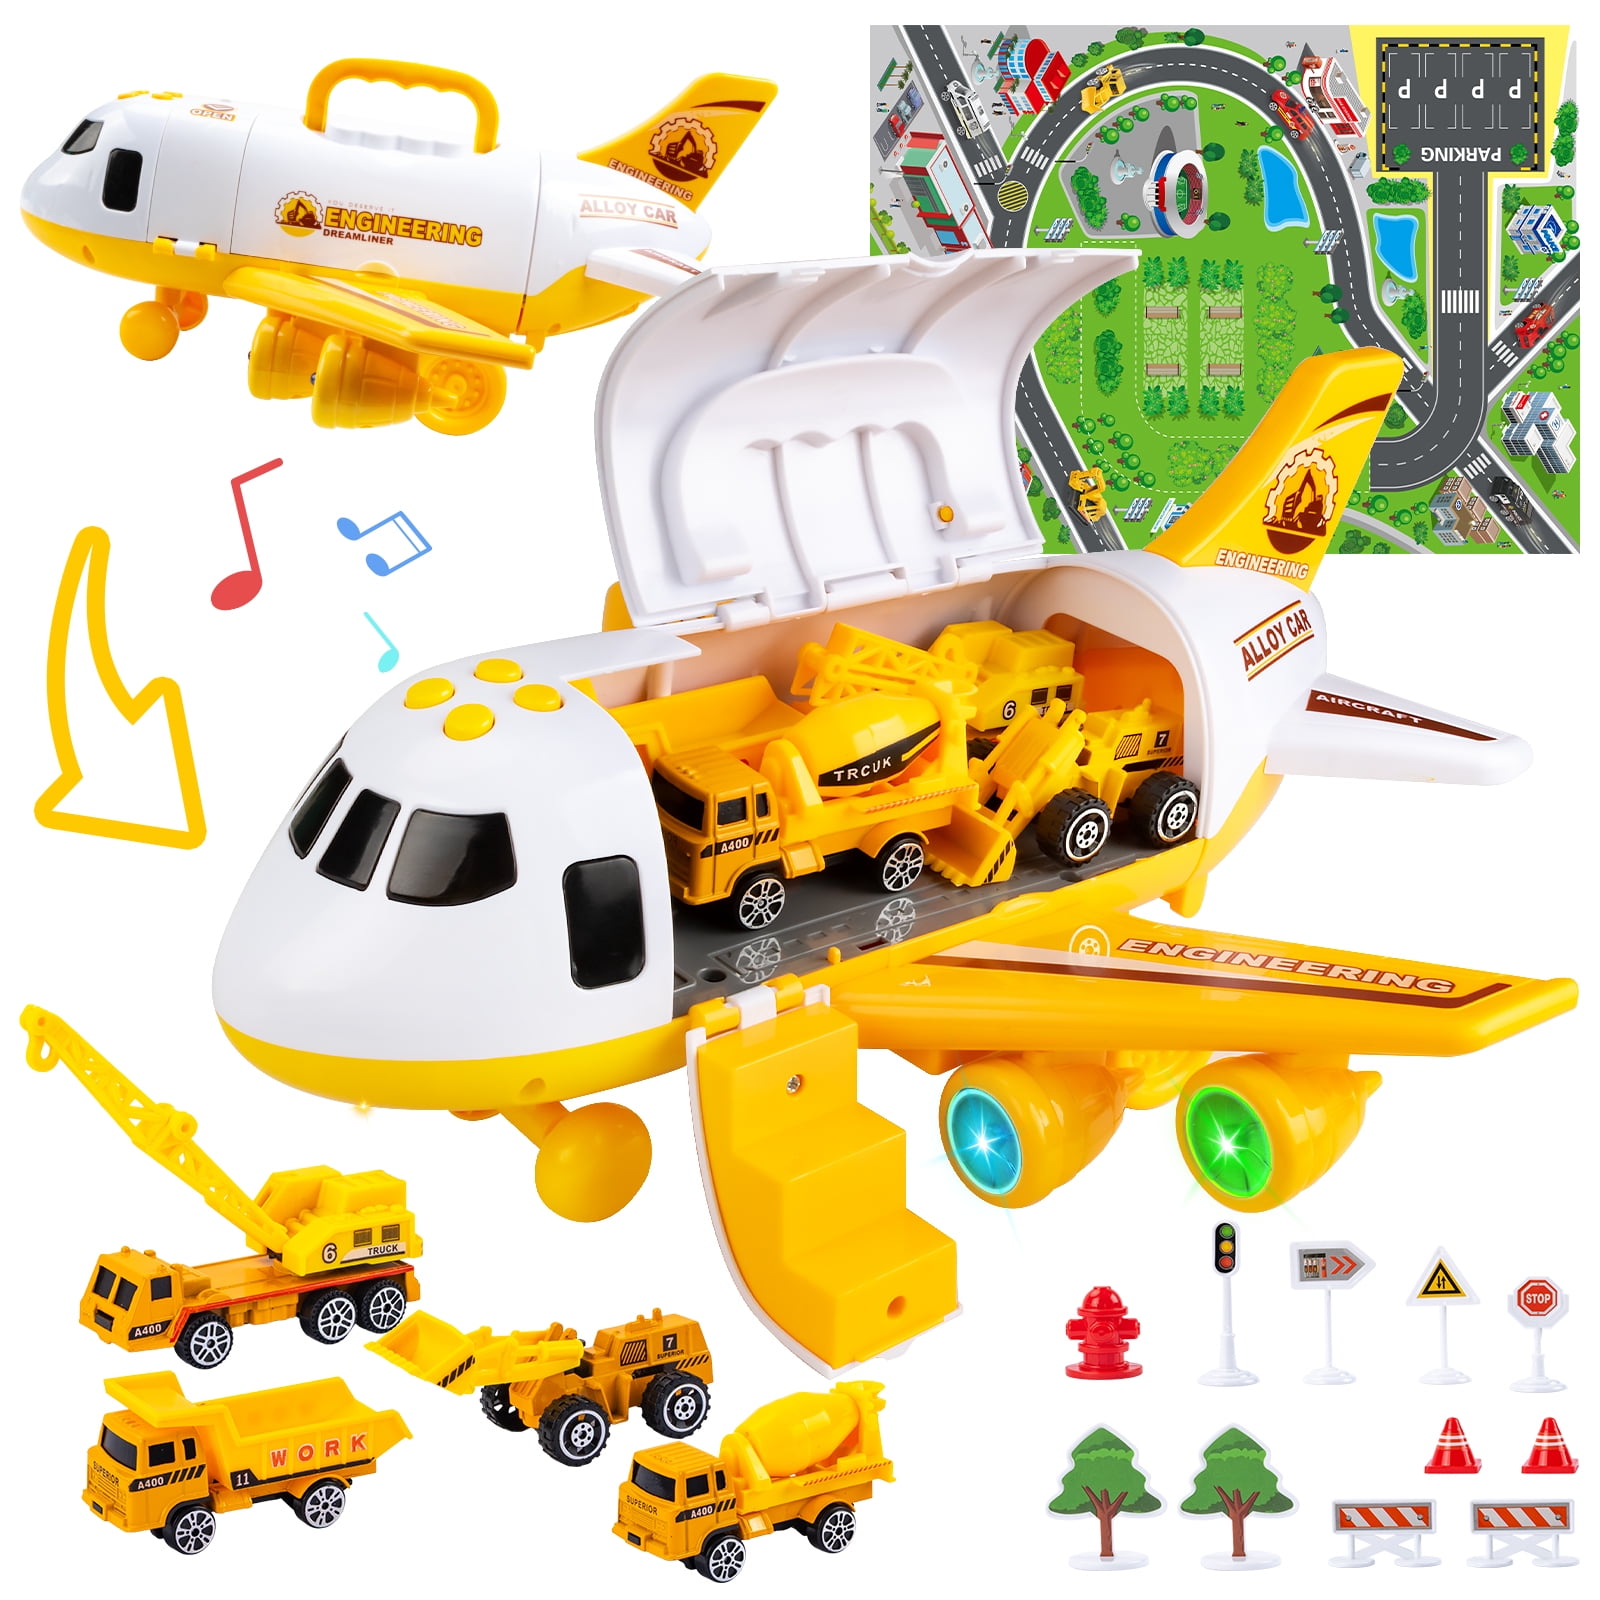 Kidsthrill Mini Friction Powered Airplanes with Lights and Air Plane Sounds - Set of 3 Push and Go Toy Travel Set Planes for Toddler Kids